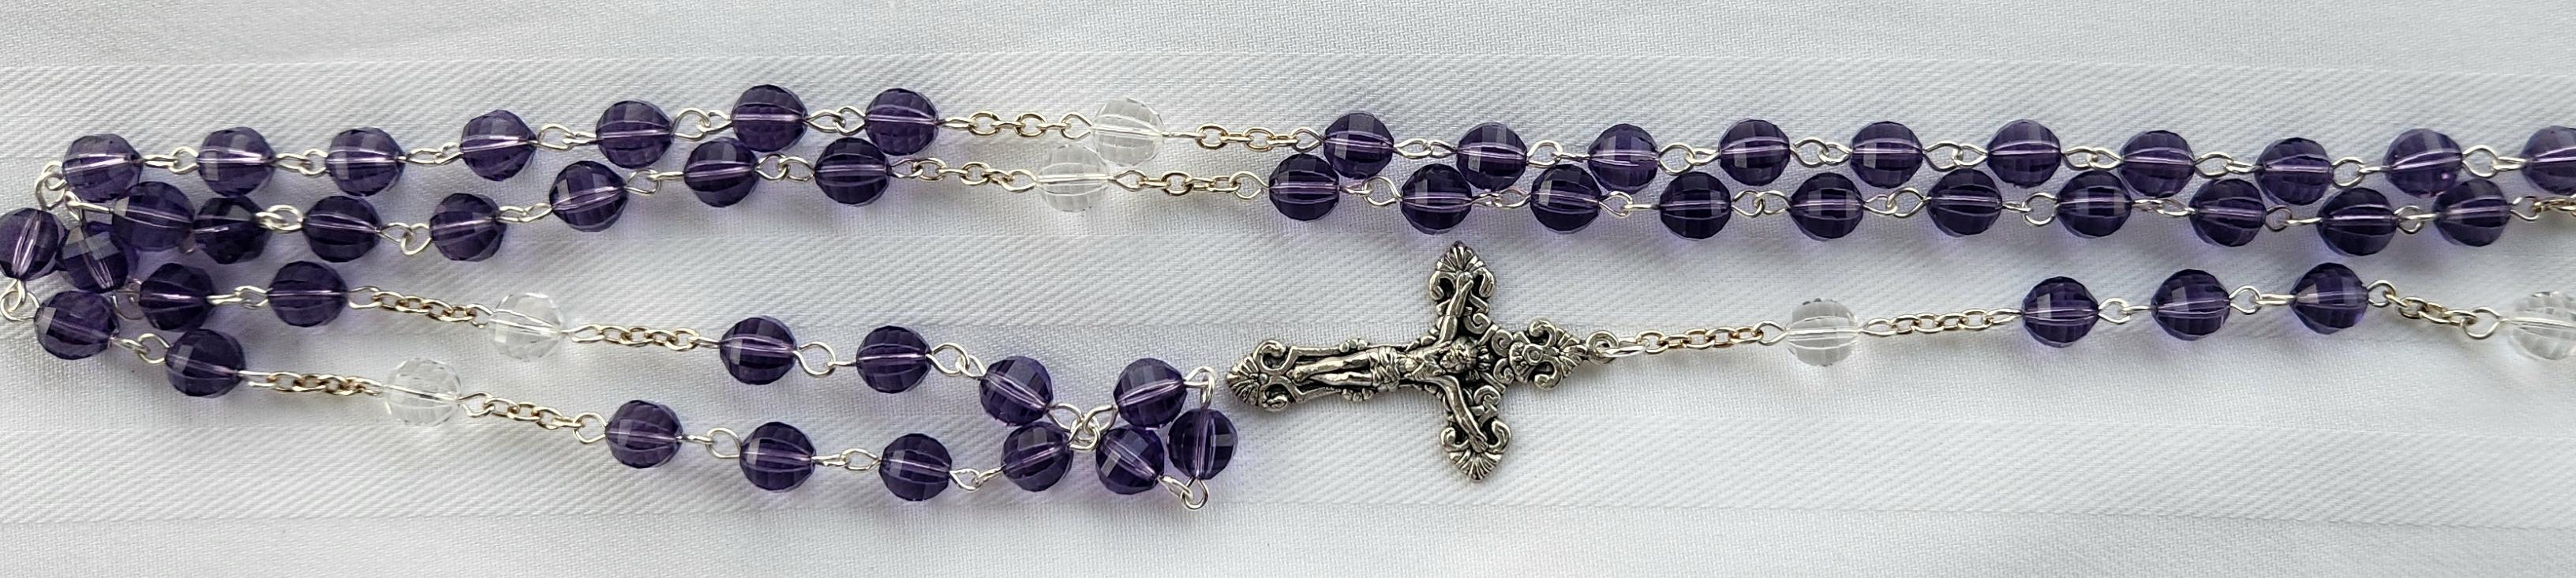 more info about rosary #80